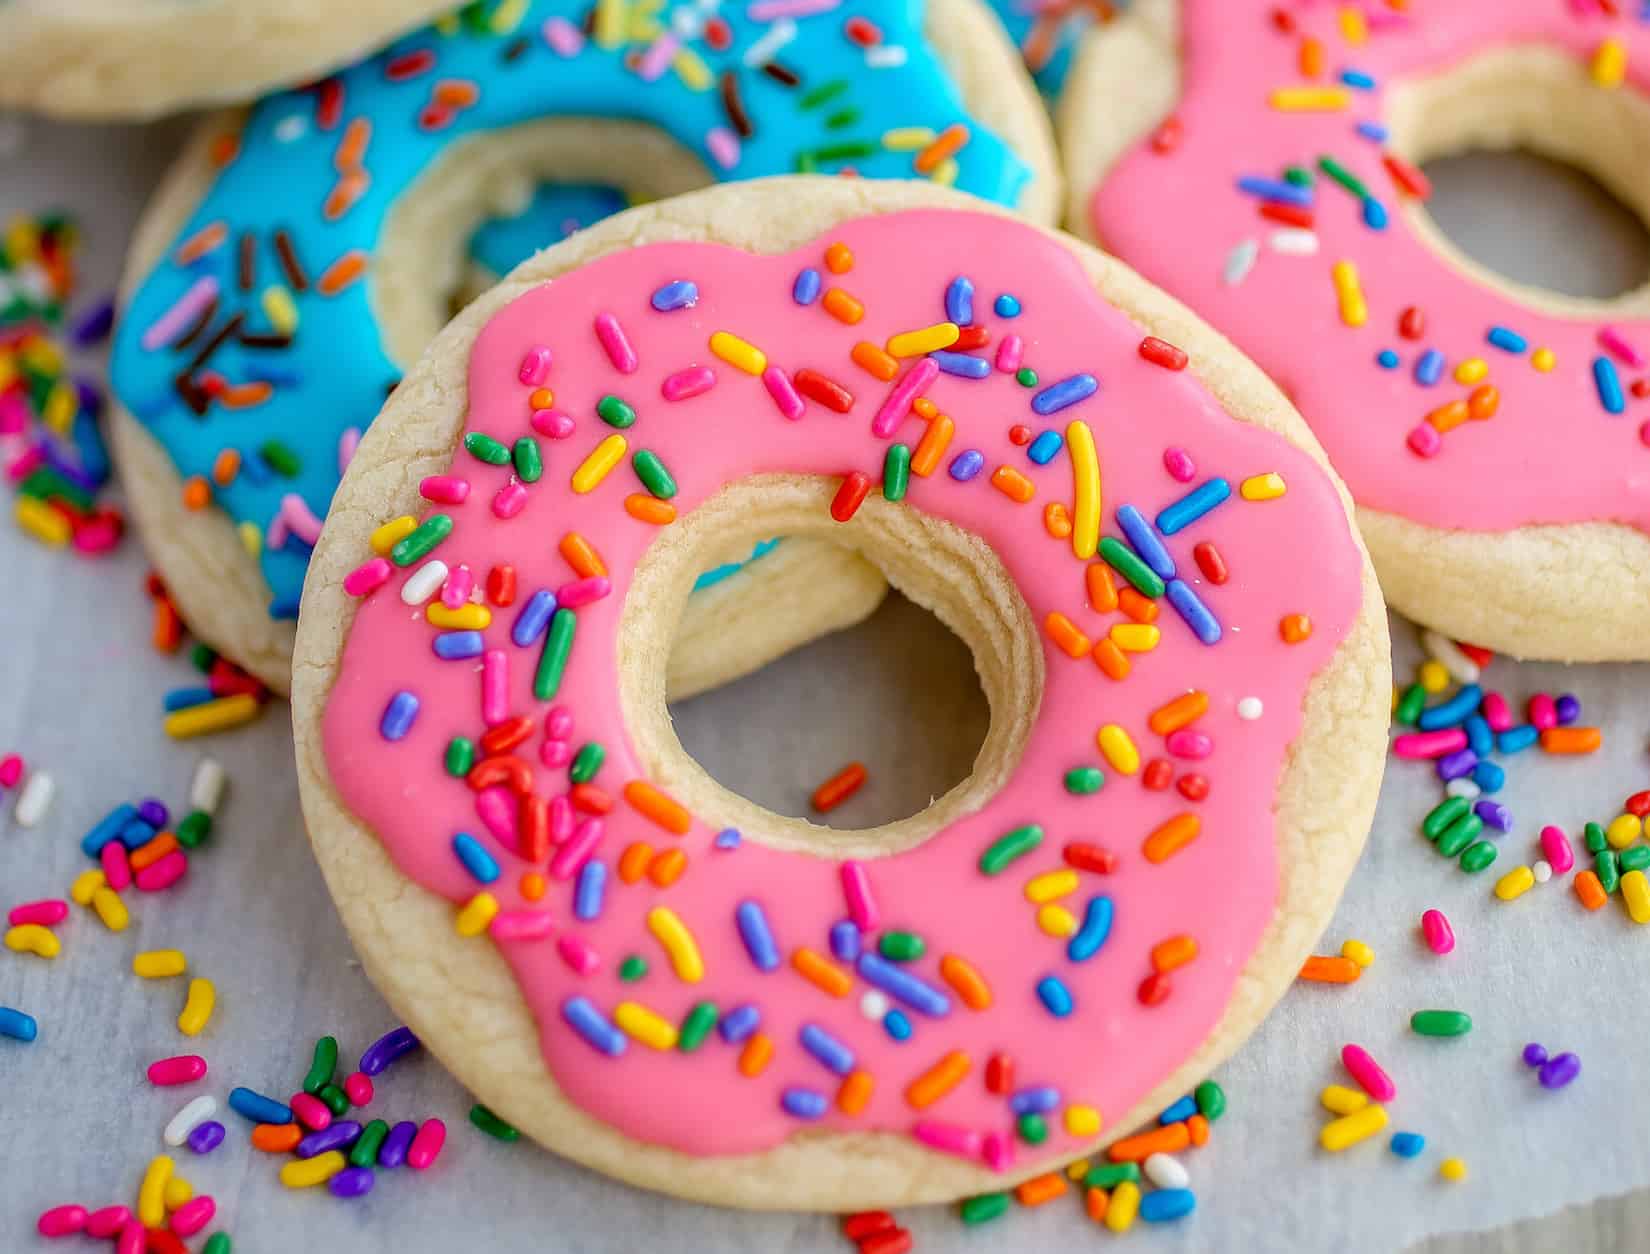 Donut Shaped Sugar Cookies with Royal Icing - Deliciously thick and soft sugar cookies decorated as donuts! These cookies will melt in your mouth!